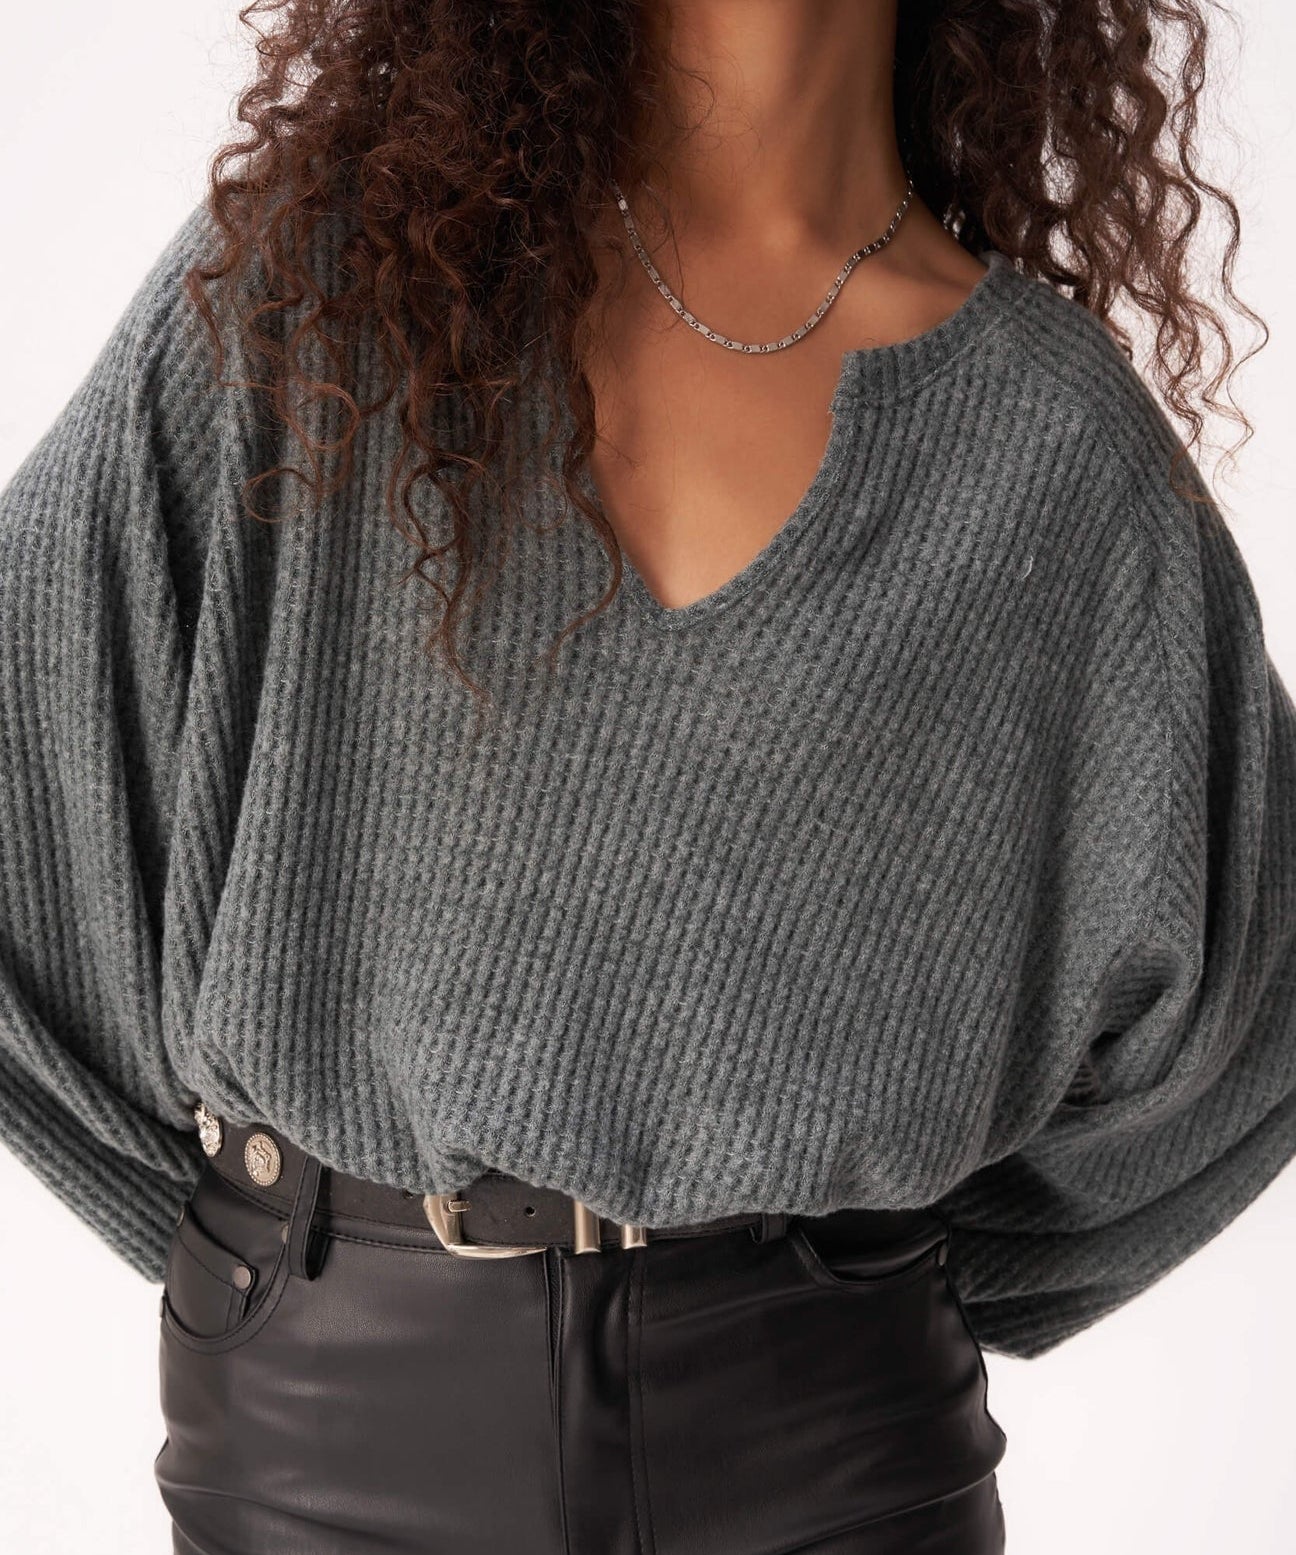 MOXIE COZY THERMAL BUBBLE TOP by Project Social T - MIDNIGHT EMERALD - Blue Sky Fashions & Lingerie